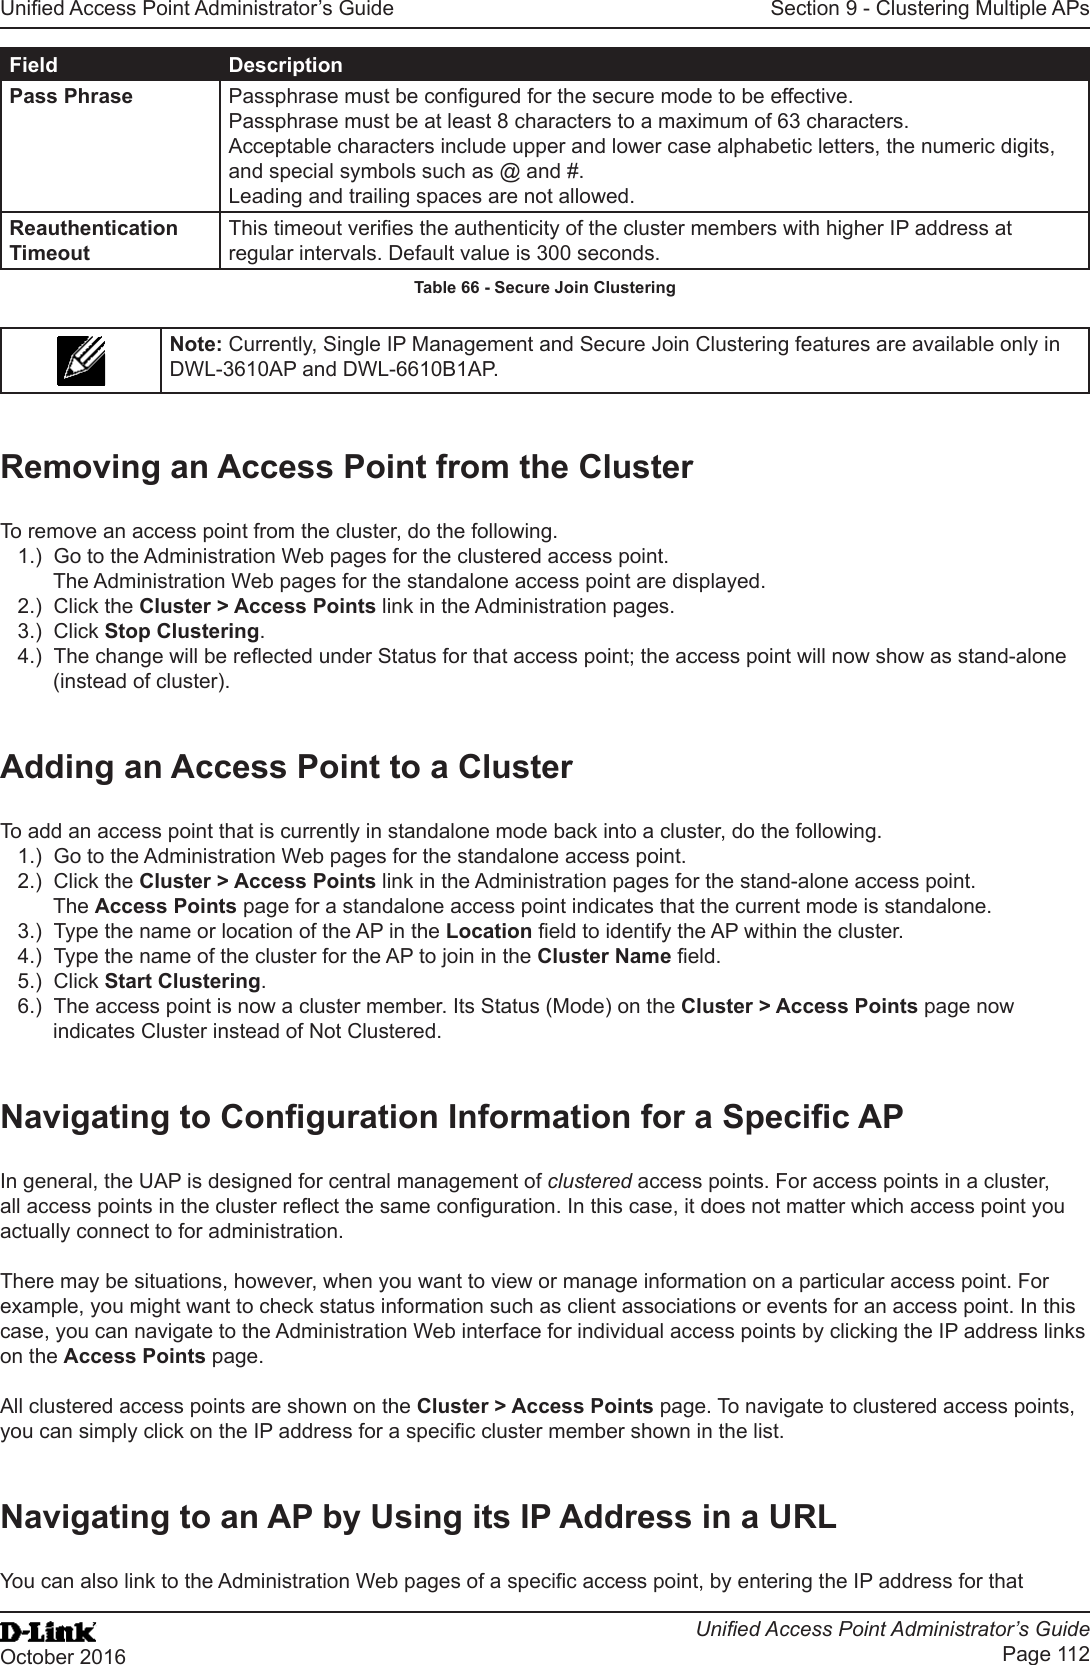 Unied Access Point Administrator’s GuideUnied Access Point Administrator’s GuidePage 112October 2016Section 9 - Clustering Multiple APsField DescriptionPass Phrase Passphrase must be congured for the secure mode to be effective.Passphrase must be at least 8 characters to a maximum of 63 characters.Acceptable characters include upper and lower case alphabetic letters, the numeric digits, and special symbols such as @ and #.Leading and trailing spaces are not allowed.Reauthentication TimeoutThis timeout veries the authenticity of the cluster members with higher IP address at regular intervals. Default value is 300 seconds.Table 66 - Secure Join ClusteringNote: Currently, Single IP Management and Secure Join Clustering features are available only in DWL-3610AP and DWL-6610B1AP.Removing an Access Point from the ClusterTo remove an access point from the cluster, do the following.1.)  Go to the Administration Web pages for the clustered access point. The Administration Web pages for the standalone access point are displayed.2.)  Click the Cluster &gt; Access Points link in the Administration pages.3.)  Click Stop Clustering.4.)  The change will be reected under Status for that access point; the access point will now show as stand-alone (instead of cluster).Adding an Access Point to a ClusterTo add an access point that is currently in standalone mode back into a cluster, do the following.1.)  Go to the Administration Web pages for the standalone access point.2.)  Click the Cluster &gt; Access Points link in the Administration pages for the stand-alone access point.The Access Points page for a standalone access point indicates that the current mode is standalone.3.)  Type the name or location of the AP in the Location eld to identify the AP within the cluster.4.)  Type the name of the cluster for the AP to join in the Cluster Name eld.5.)  Click Start Clustering.6.)  The access point is now a cluster member. Its Status (Mode) on the Cluster &gt; Access Points page now indicates Cluster instead of Not Clustered.Navigating to Conguration Information for a Specic APIn general, the UAP is designed for central management of clustered access points. For access points in a cluster, all access points in the cluster reect the same conguration. In this case, it does not matter which access point you actually connect to for administration.There may be situations, however, when you want to view or manage information on a particular access point. For example, you might want to check status information such as client associations or events for an access point. In this case, you can navigate to the Administration Web interface for individual access points by clicking the IP address links on the Access Points page.All clustered access points are shown on the Cluster &gt; Access Points page. To navigate to clustered access points, you can simply click on the IP address for a specic cluster member shown in the list.Navigating to an AP by Using its IP Address in a URLYou can also link to the Administration Web pages of a specic access point, by entering the IP address for that 